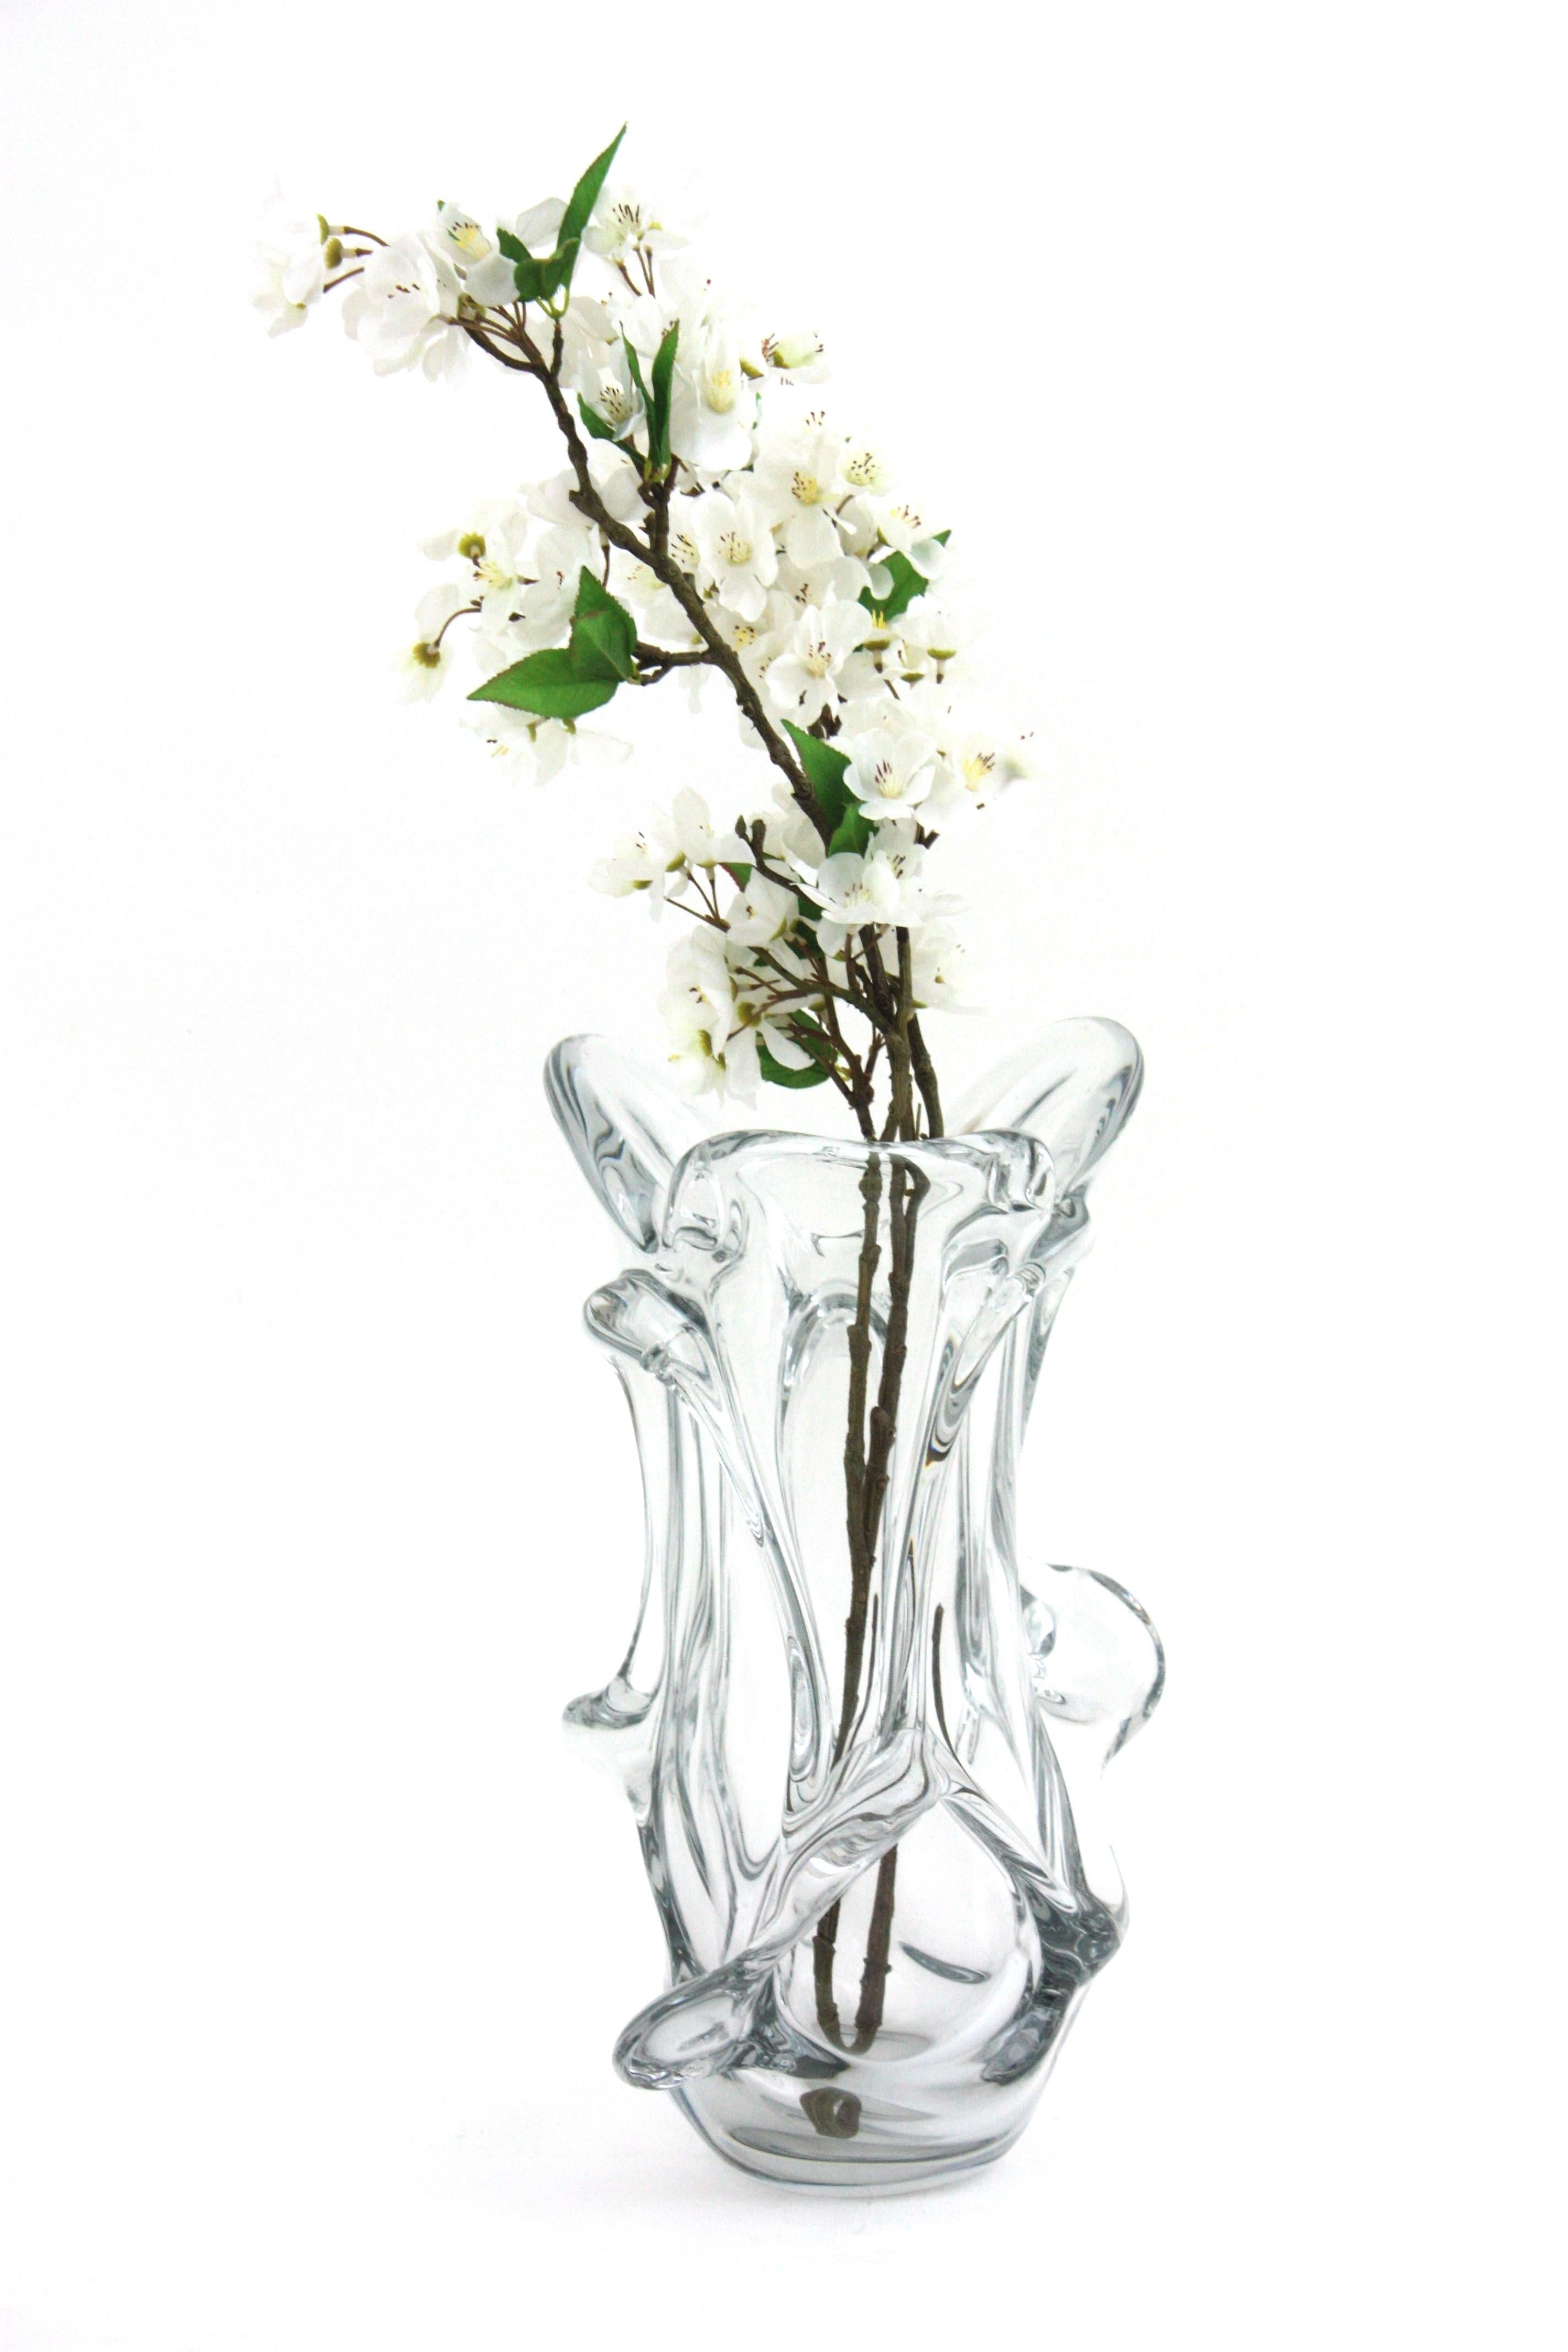 Sculptural Organic Modern Murano Clear Art Glass Vase, Italy, 1950s.
Eye-catching clear blown glass Murano vase with organic design. It shows a beautiful desing with sumptuous shapes and pulled details.
Beautiful to be used as decorative centerpiece